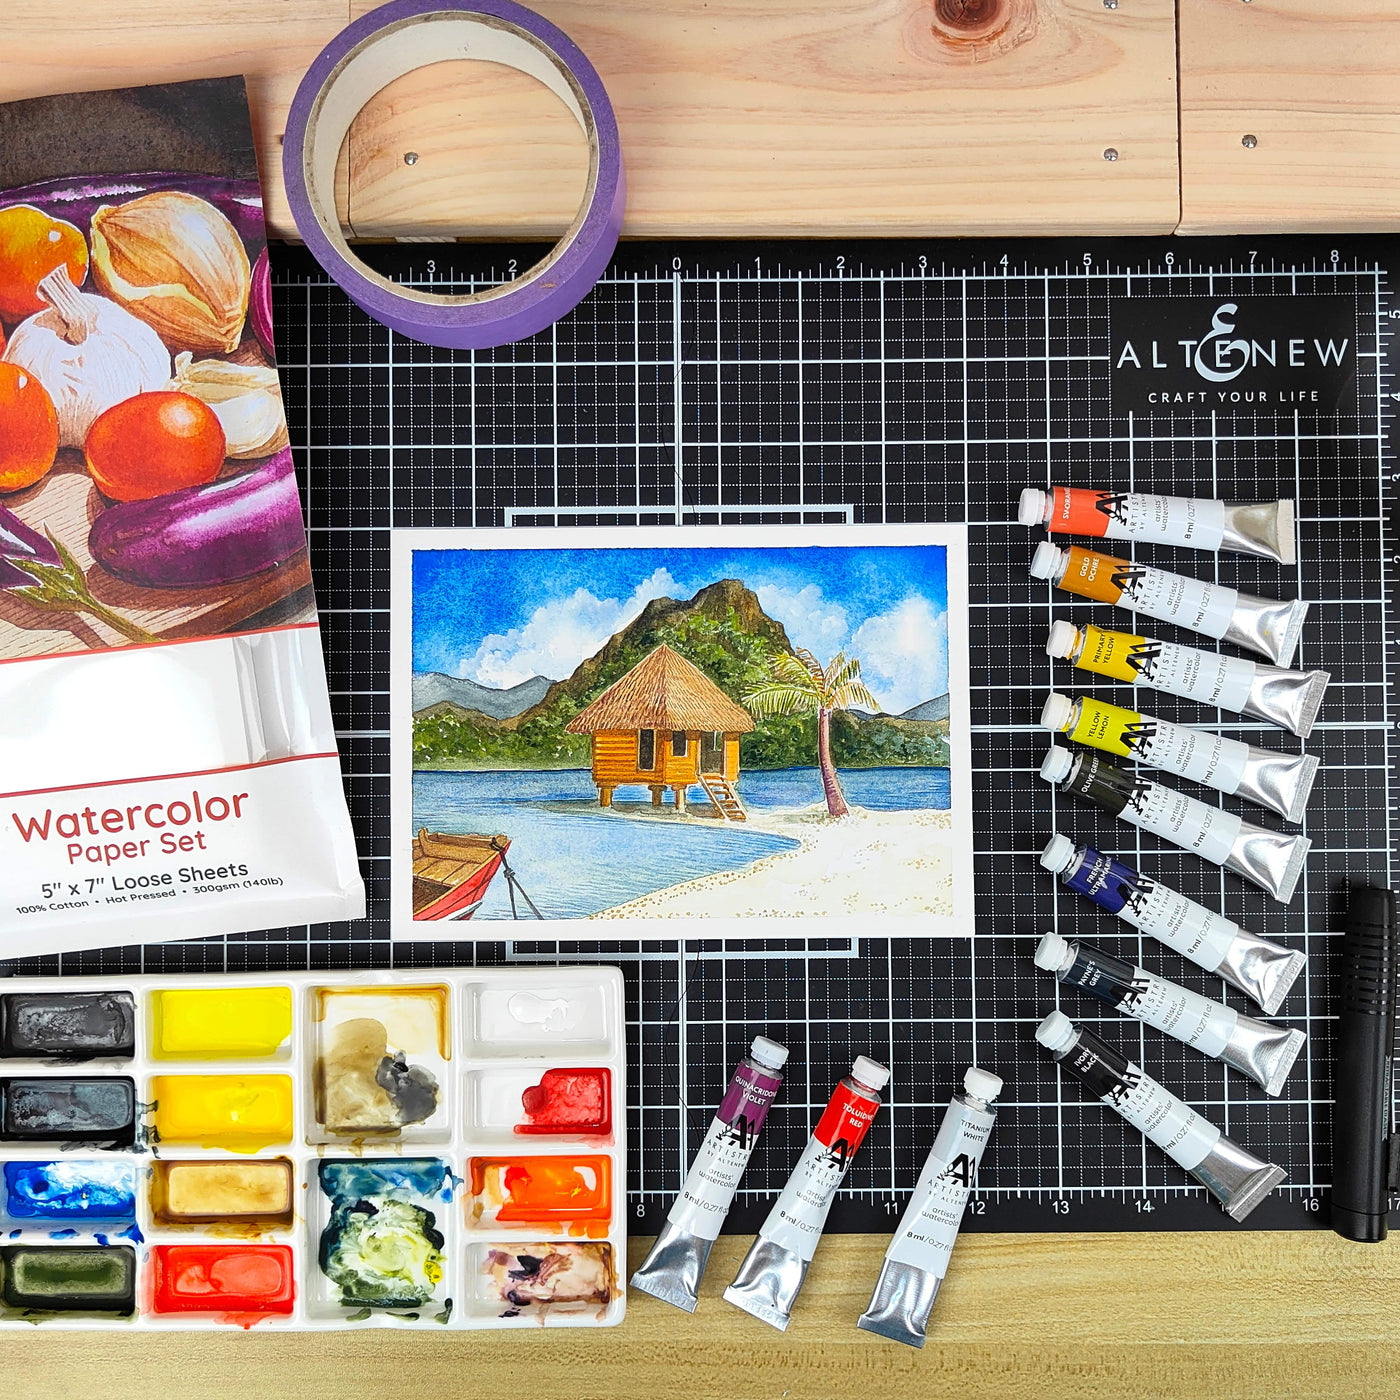 The Artist in You: Exploring Watercolor Tubes